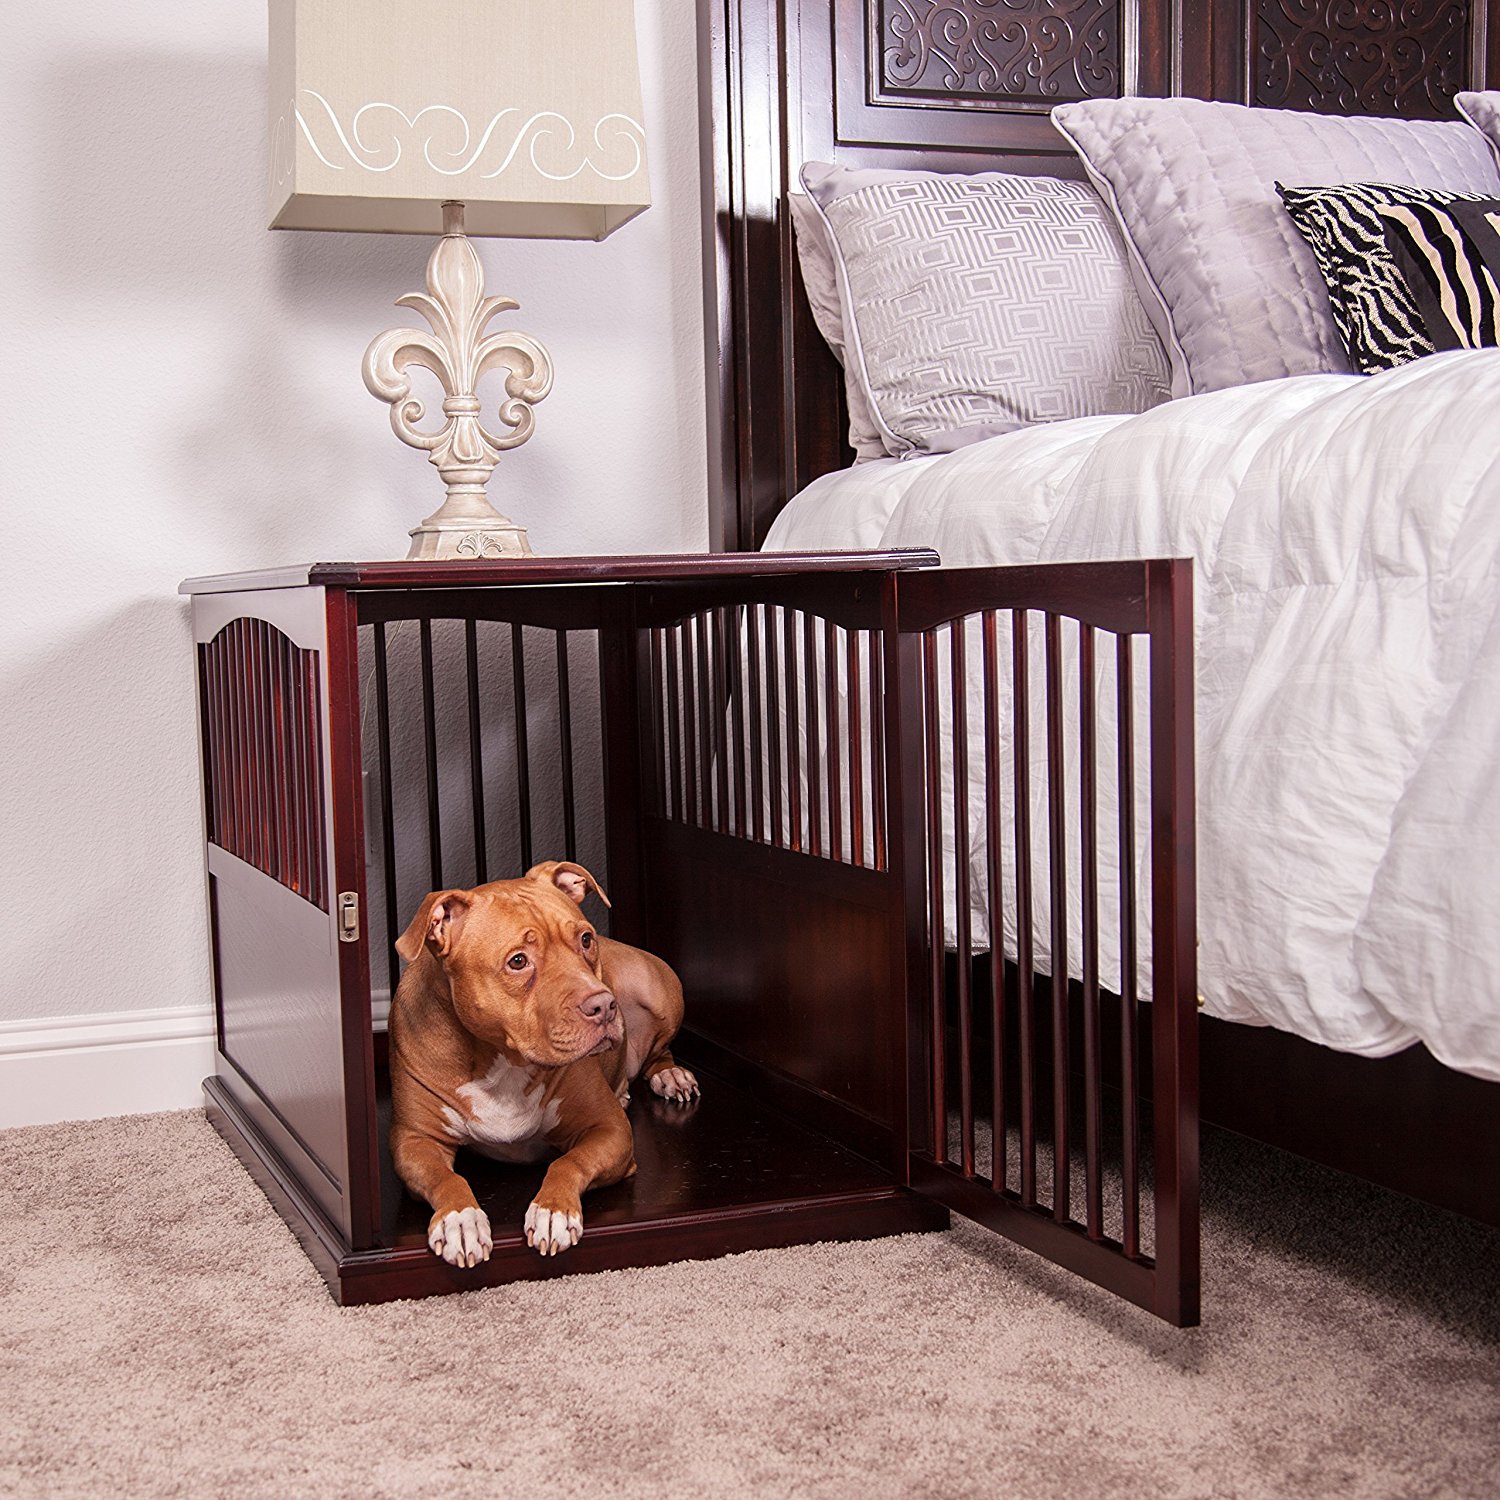 Tips on Crate Training Your Dog 3